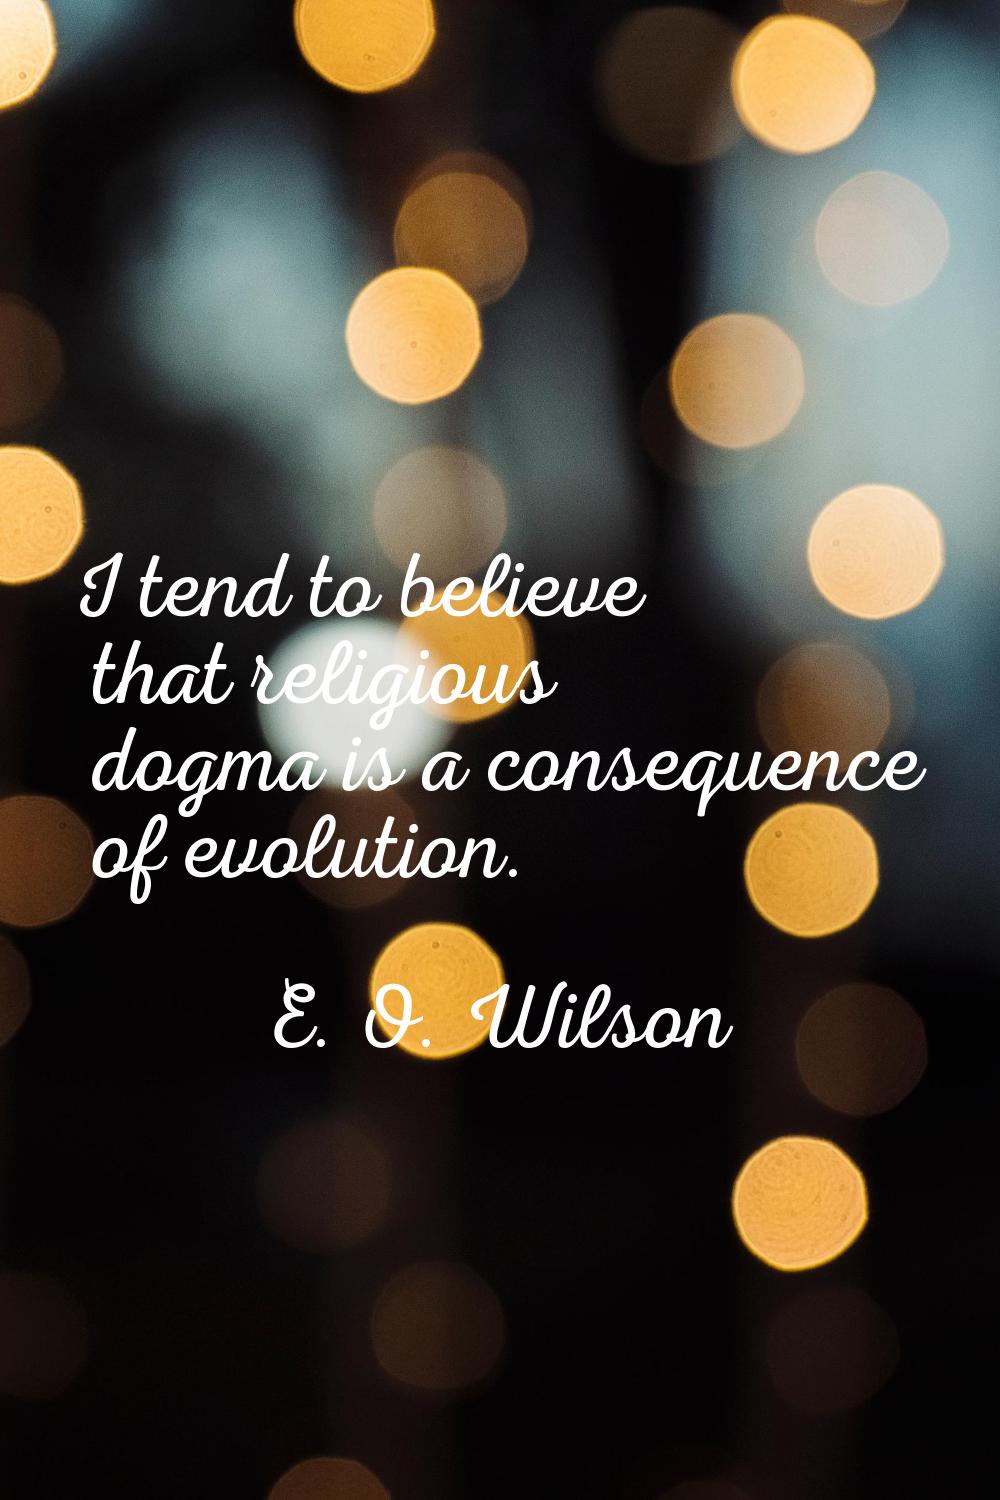 I tend to believe that religious dogma is a consequence of evolution.